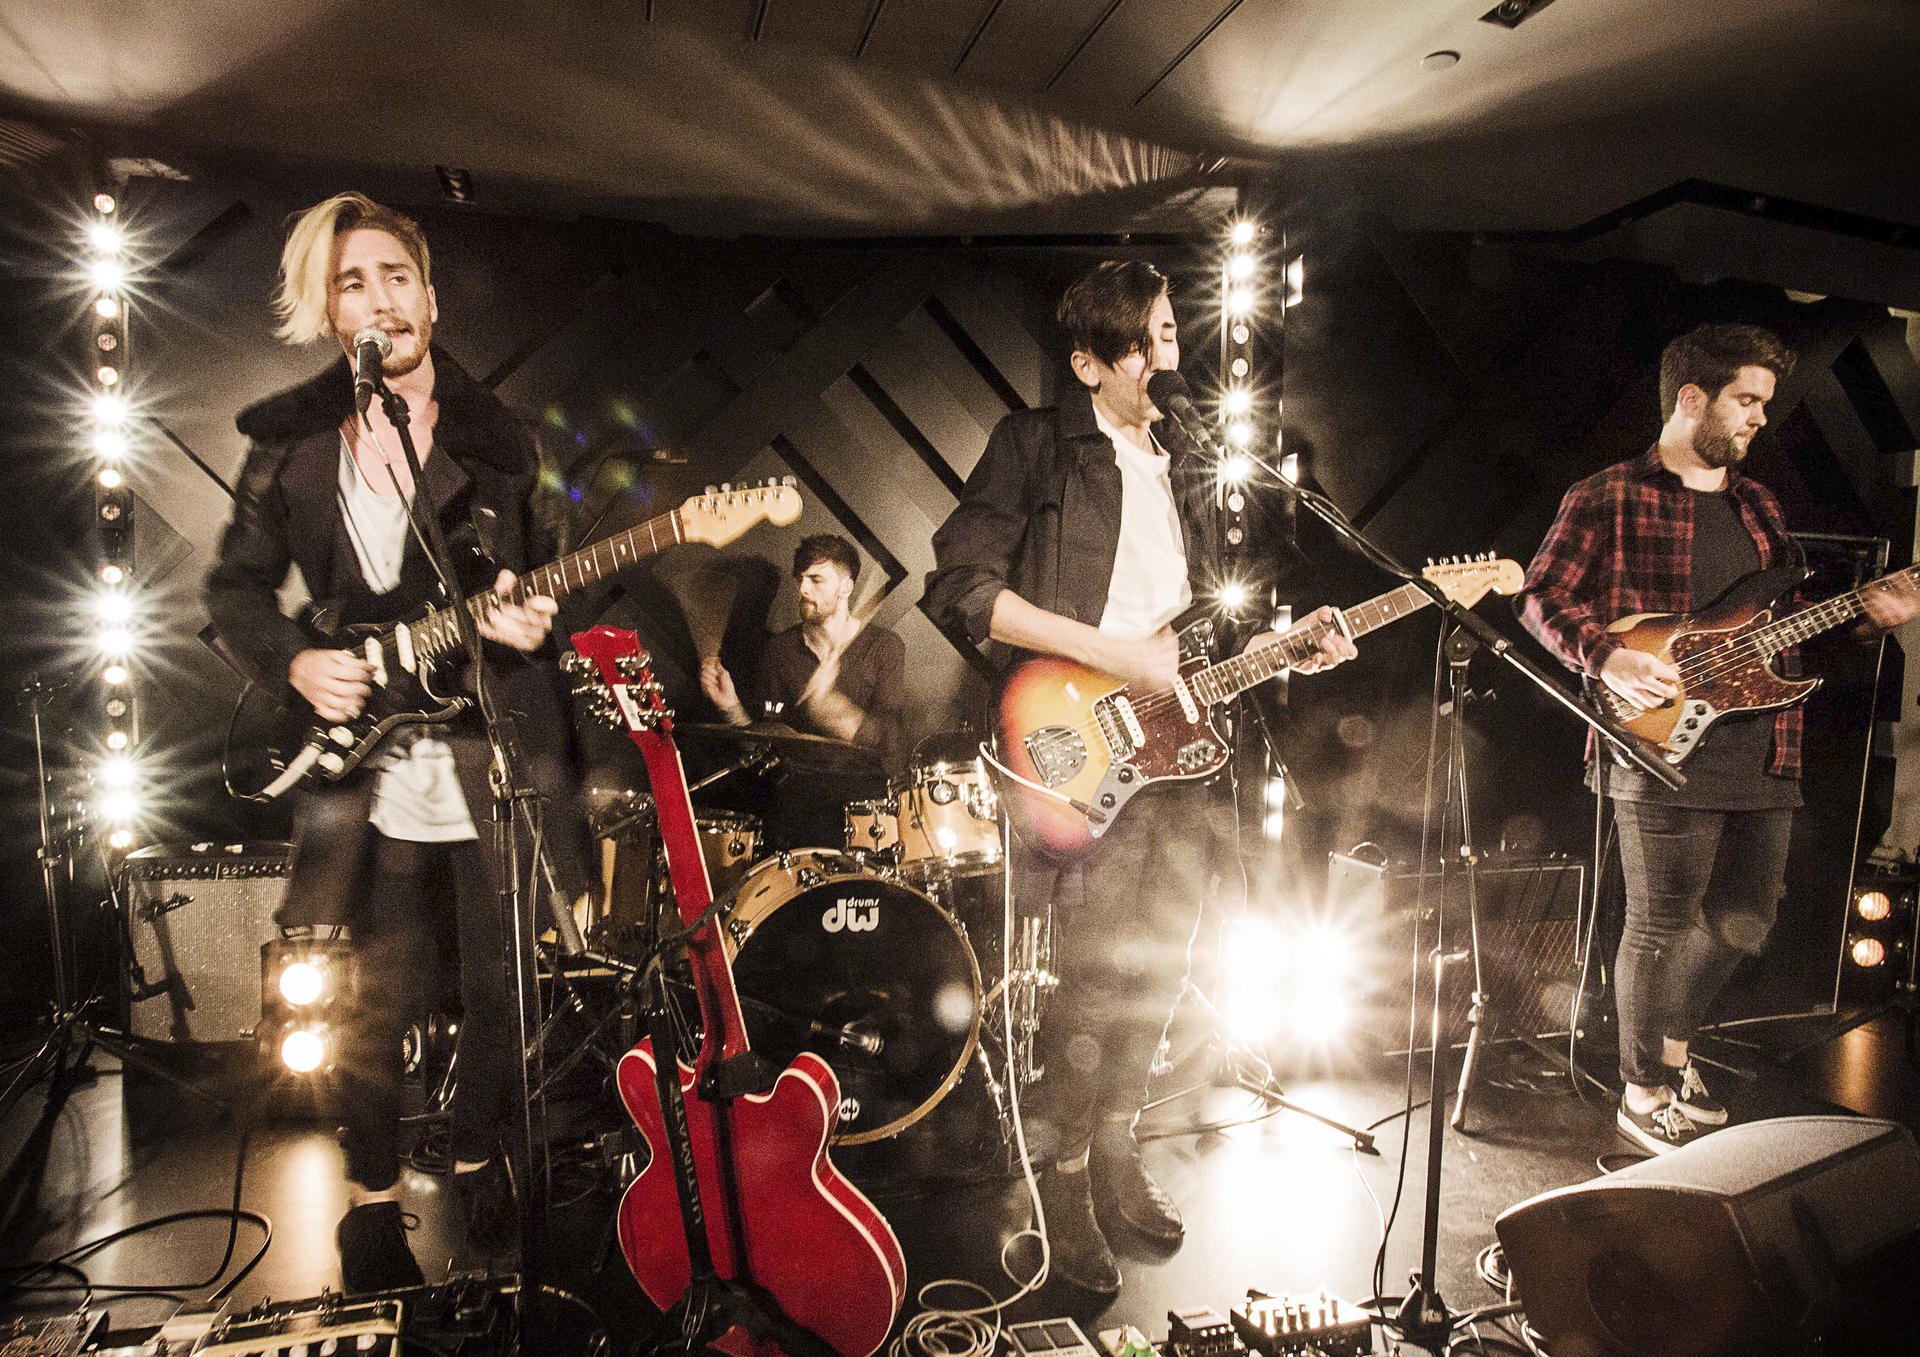 The British band Wolf Alice rocked the photo exhibition